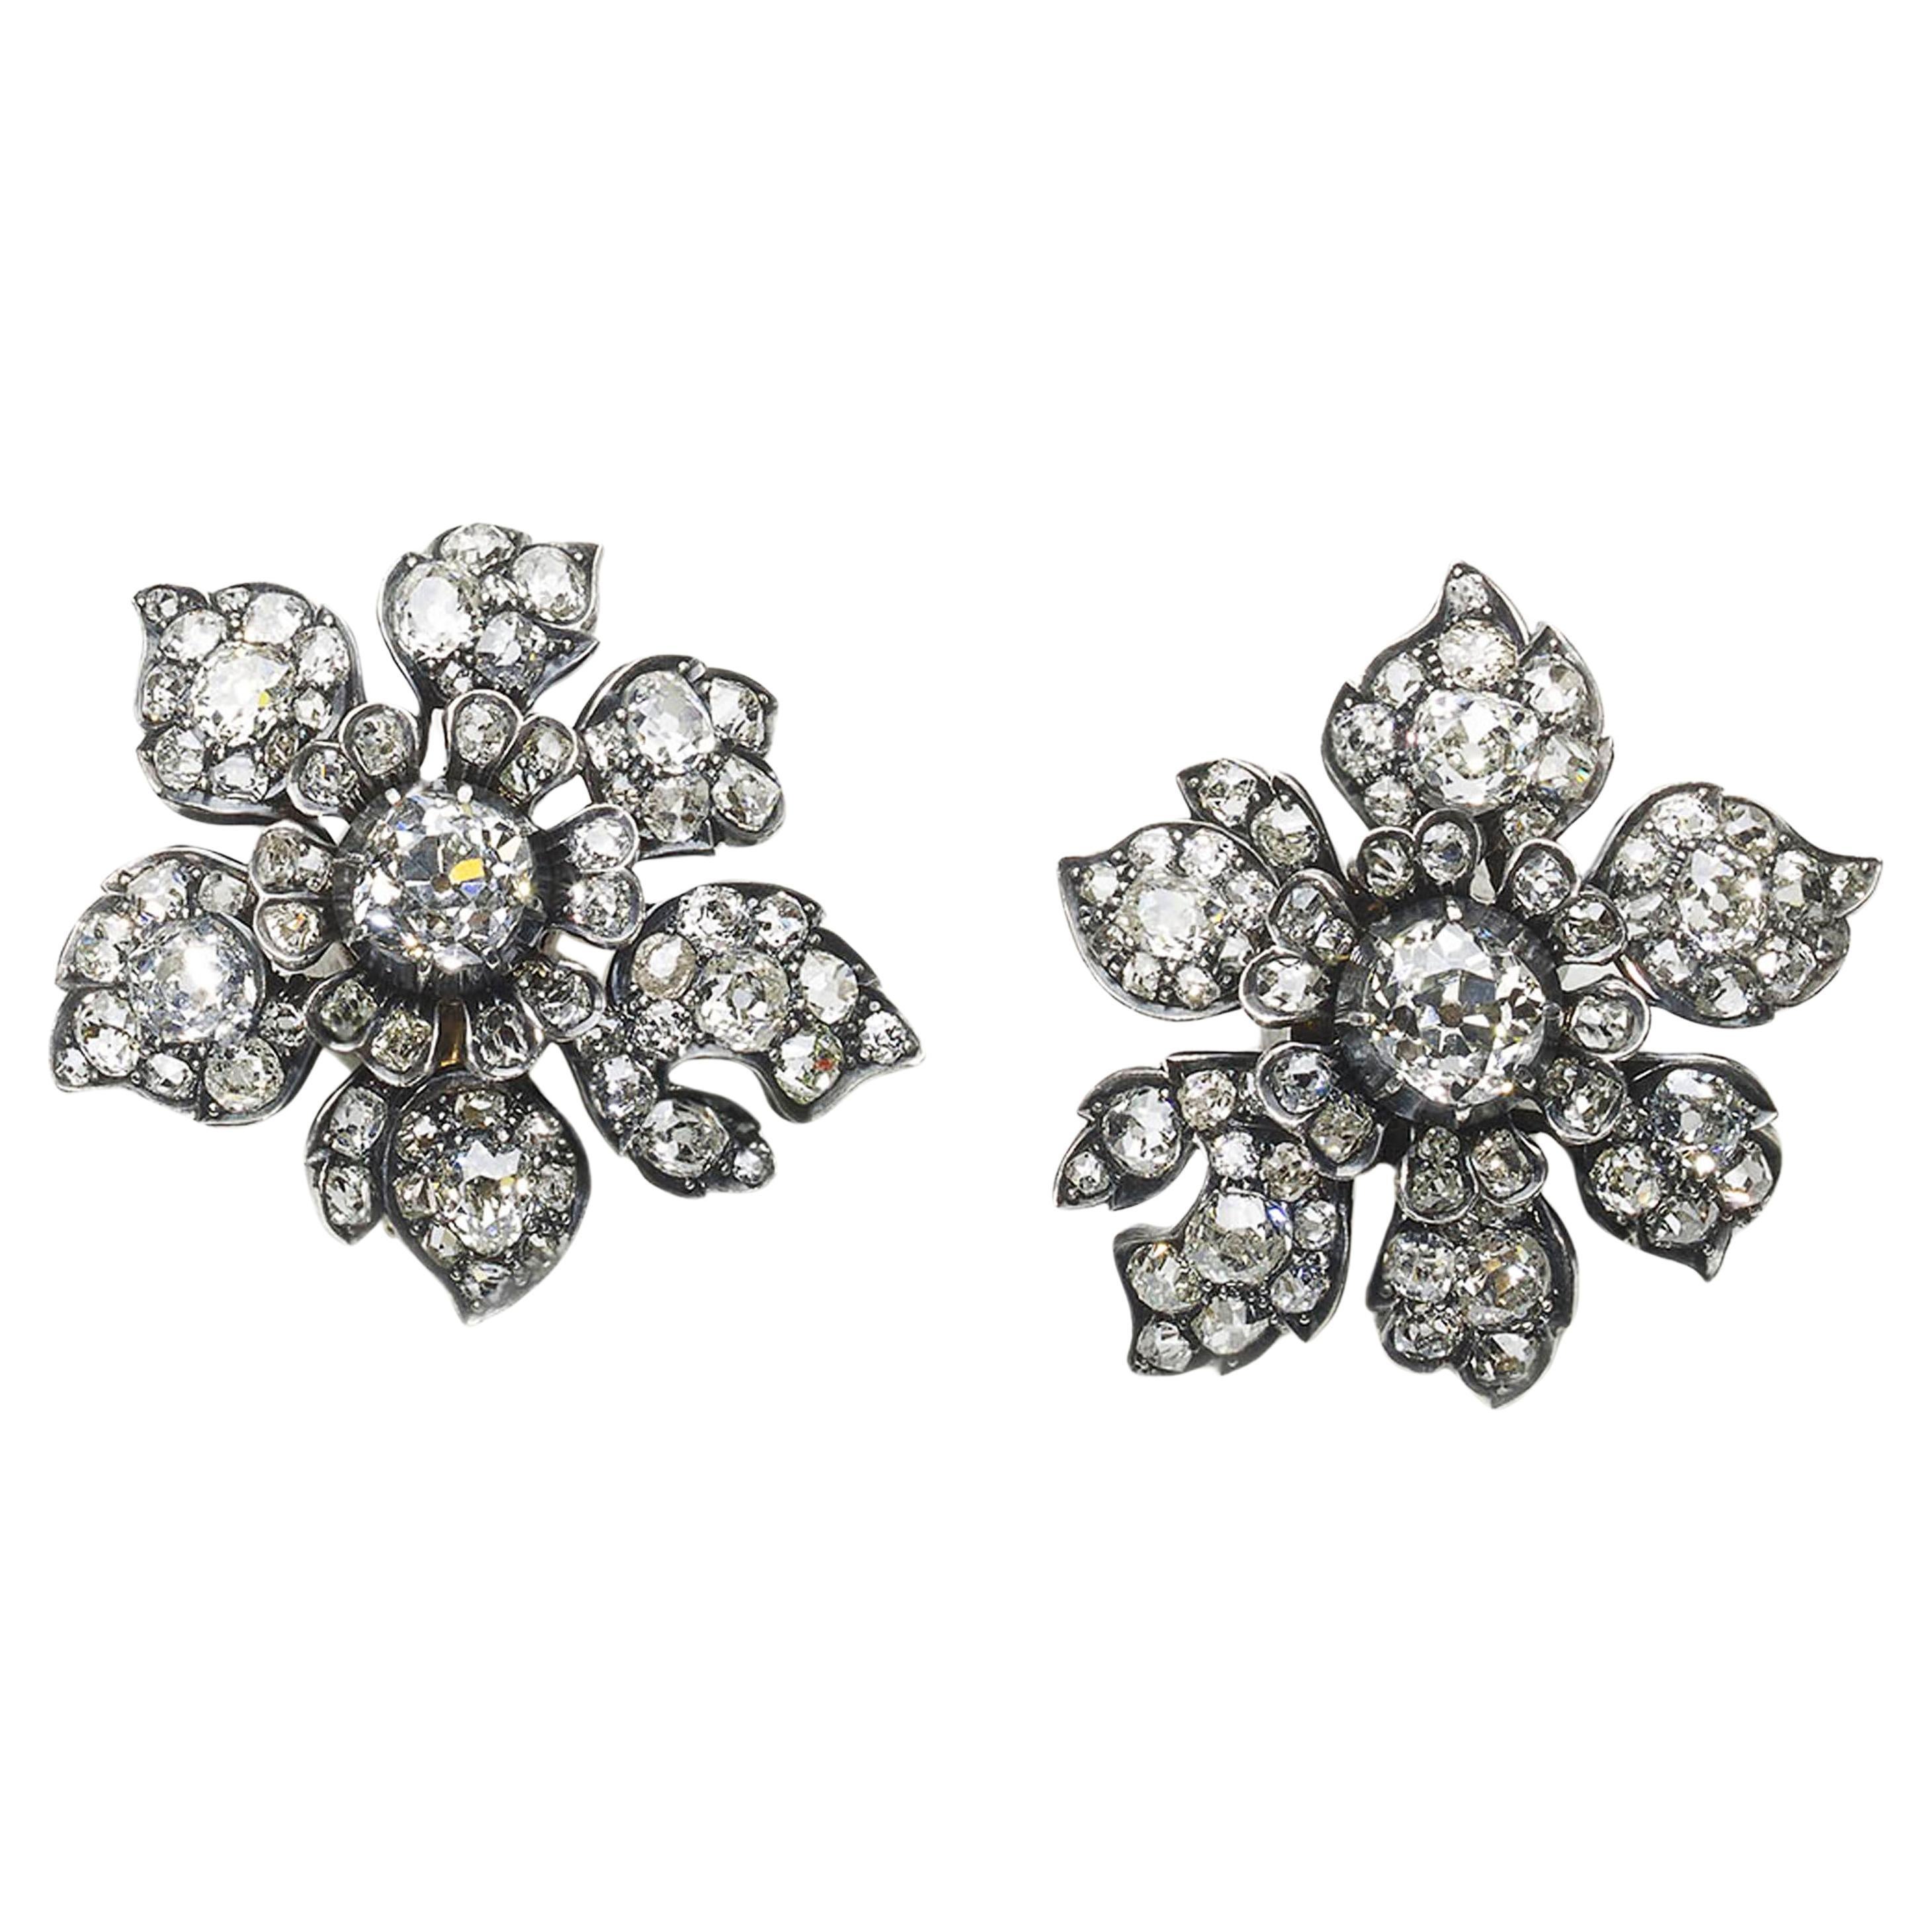 Antique Diamond and Silver-Upon-Gold Flower Earrings Circa 1880 9.00 Carats